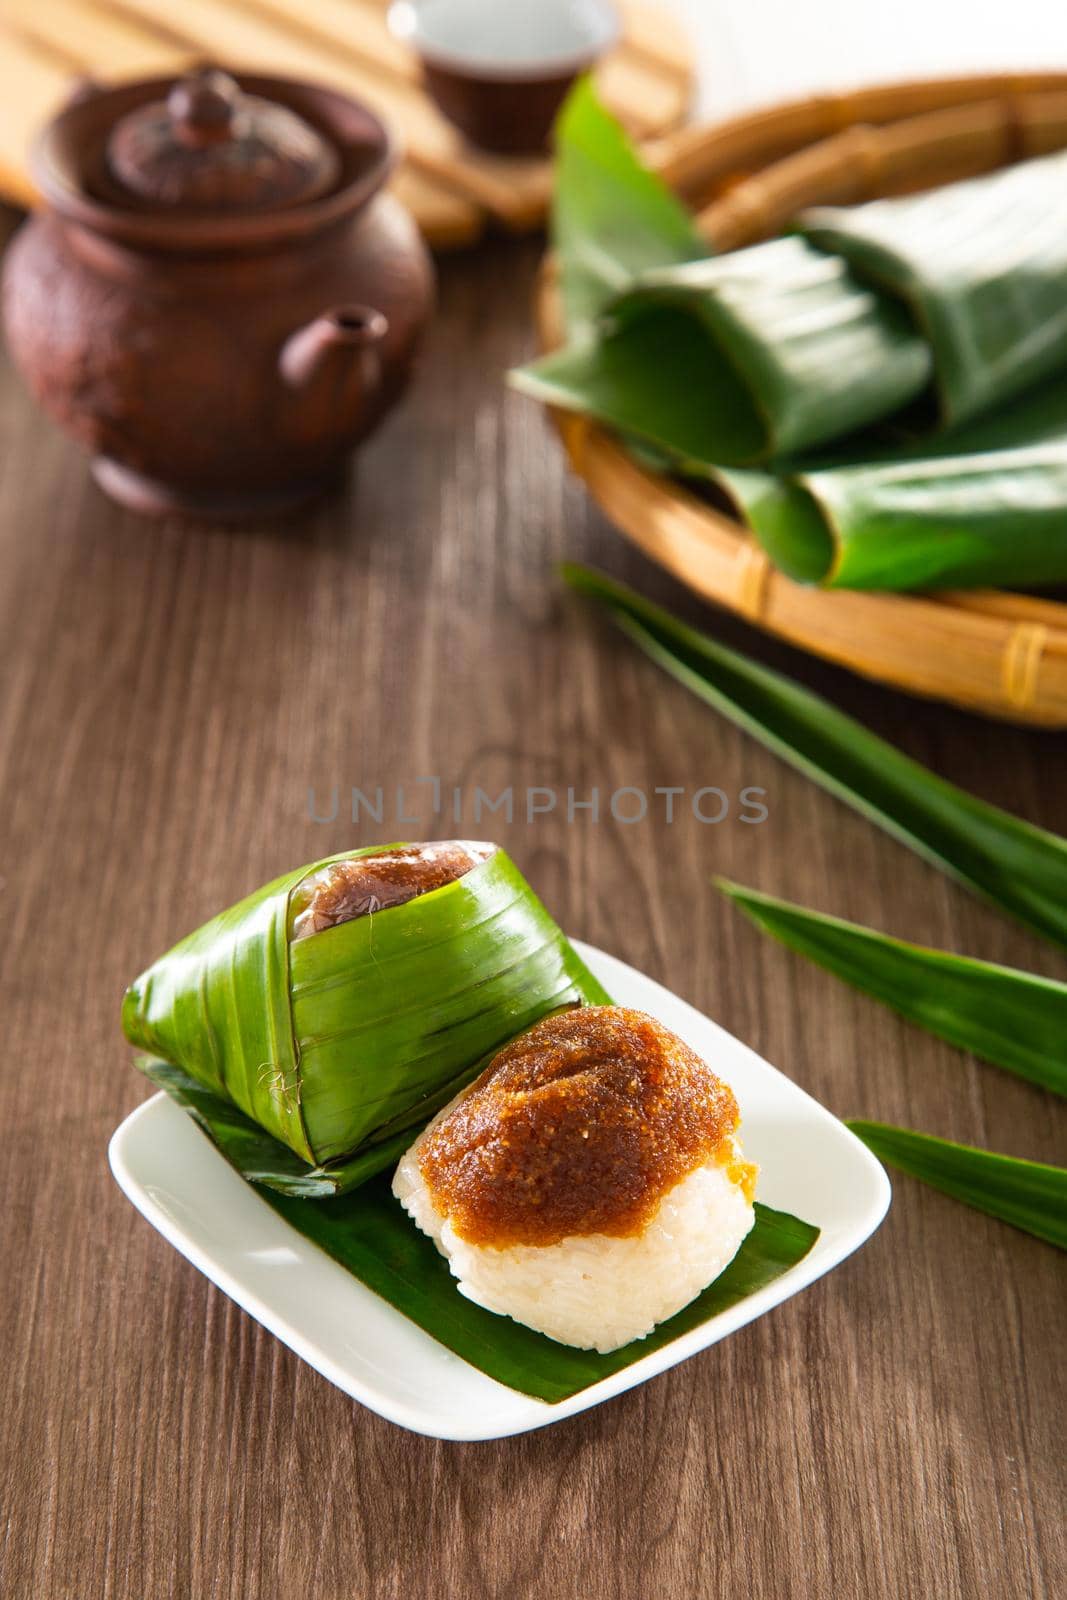 Kuih Pulut inti, traditional Malaysian Nyonya sweet dessert. It is made of steamed glutinous rice with coconut milk and eaten with coconut filling. by tehcheesiong